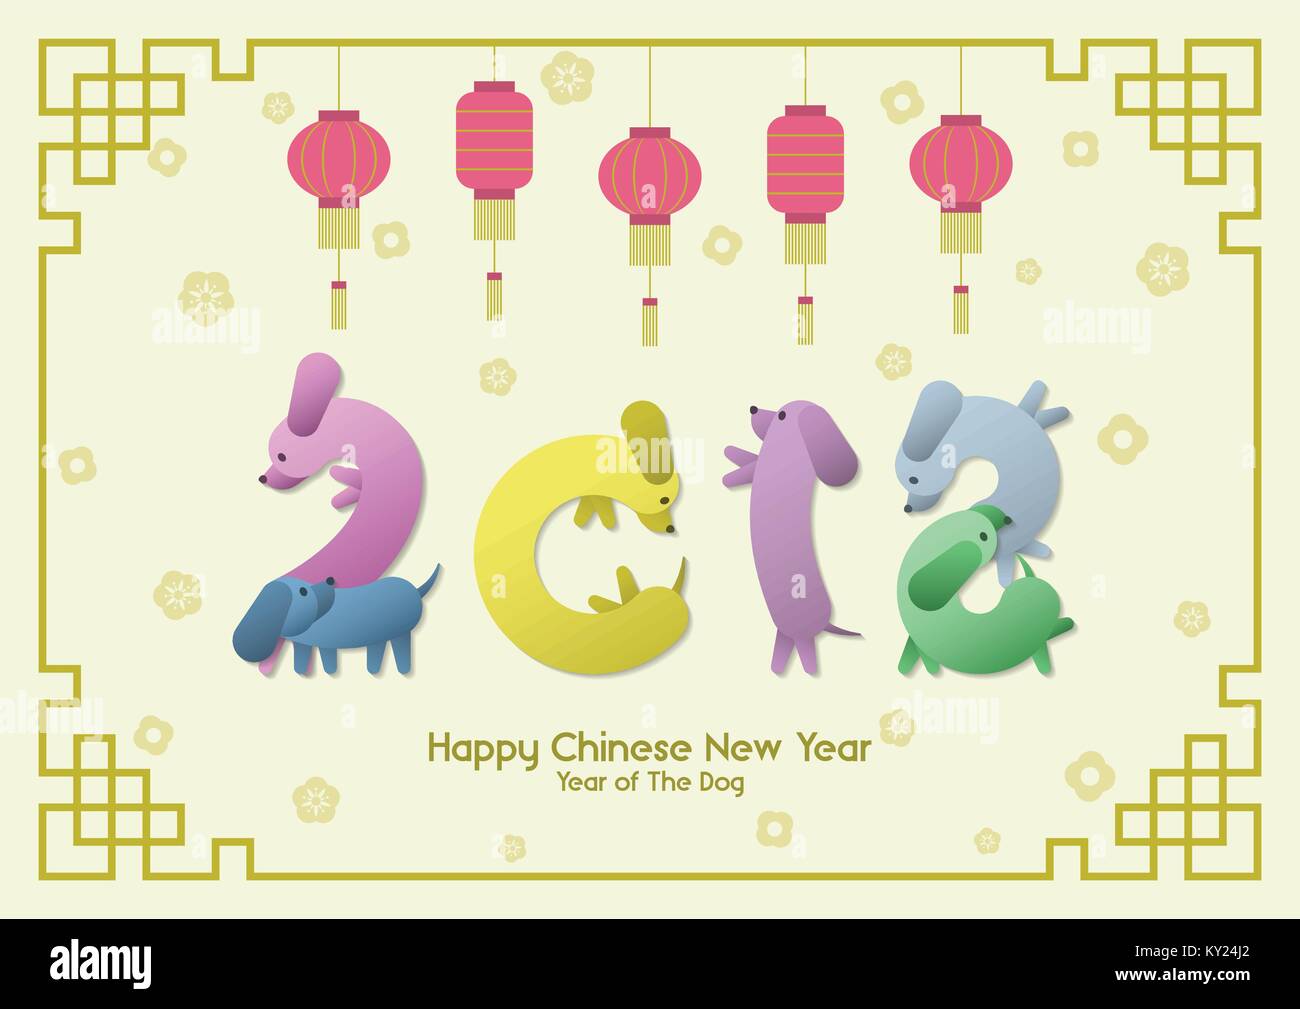 Happy Chinese New Year, Year of the Dog, colorful funny sausage Dachshund dogs group pose like number 2018 with hanging red lanterns, gold Asian flowe Stock Vector